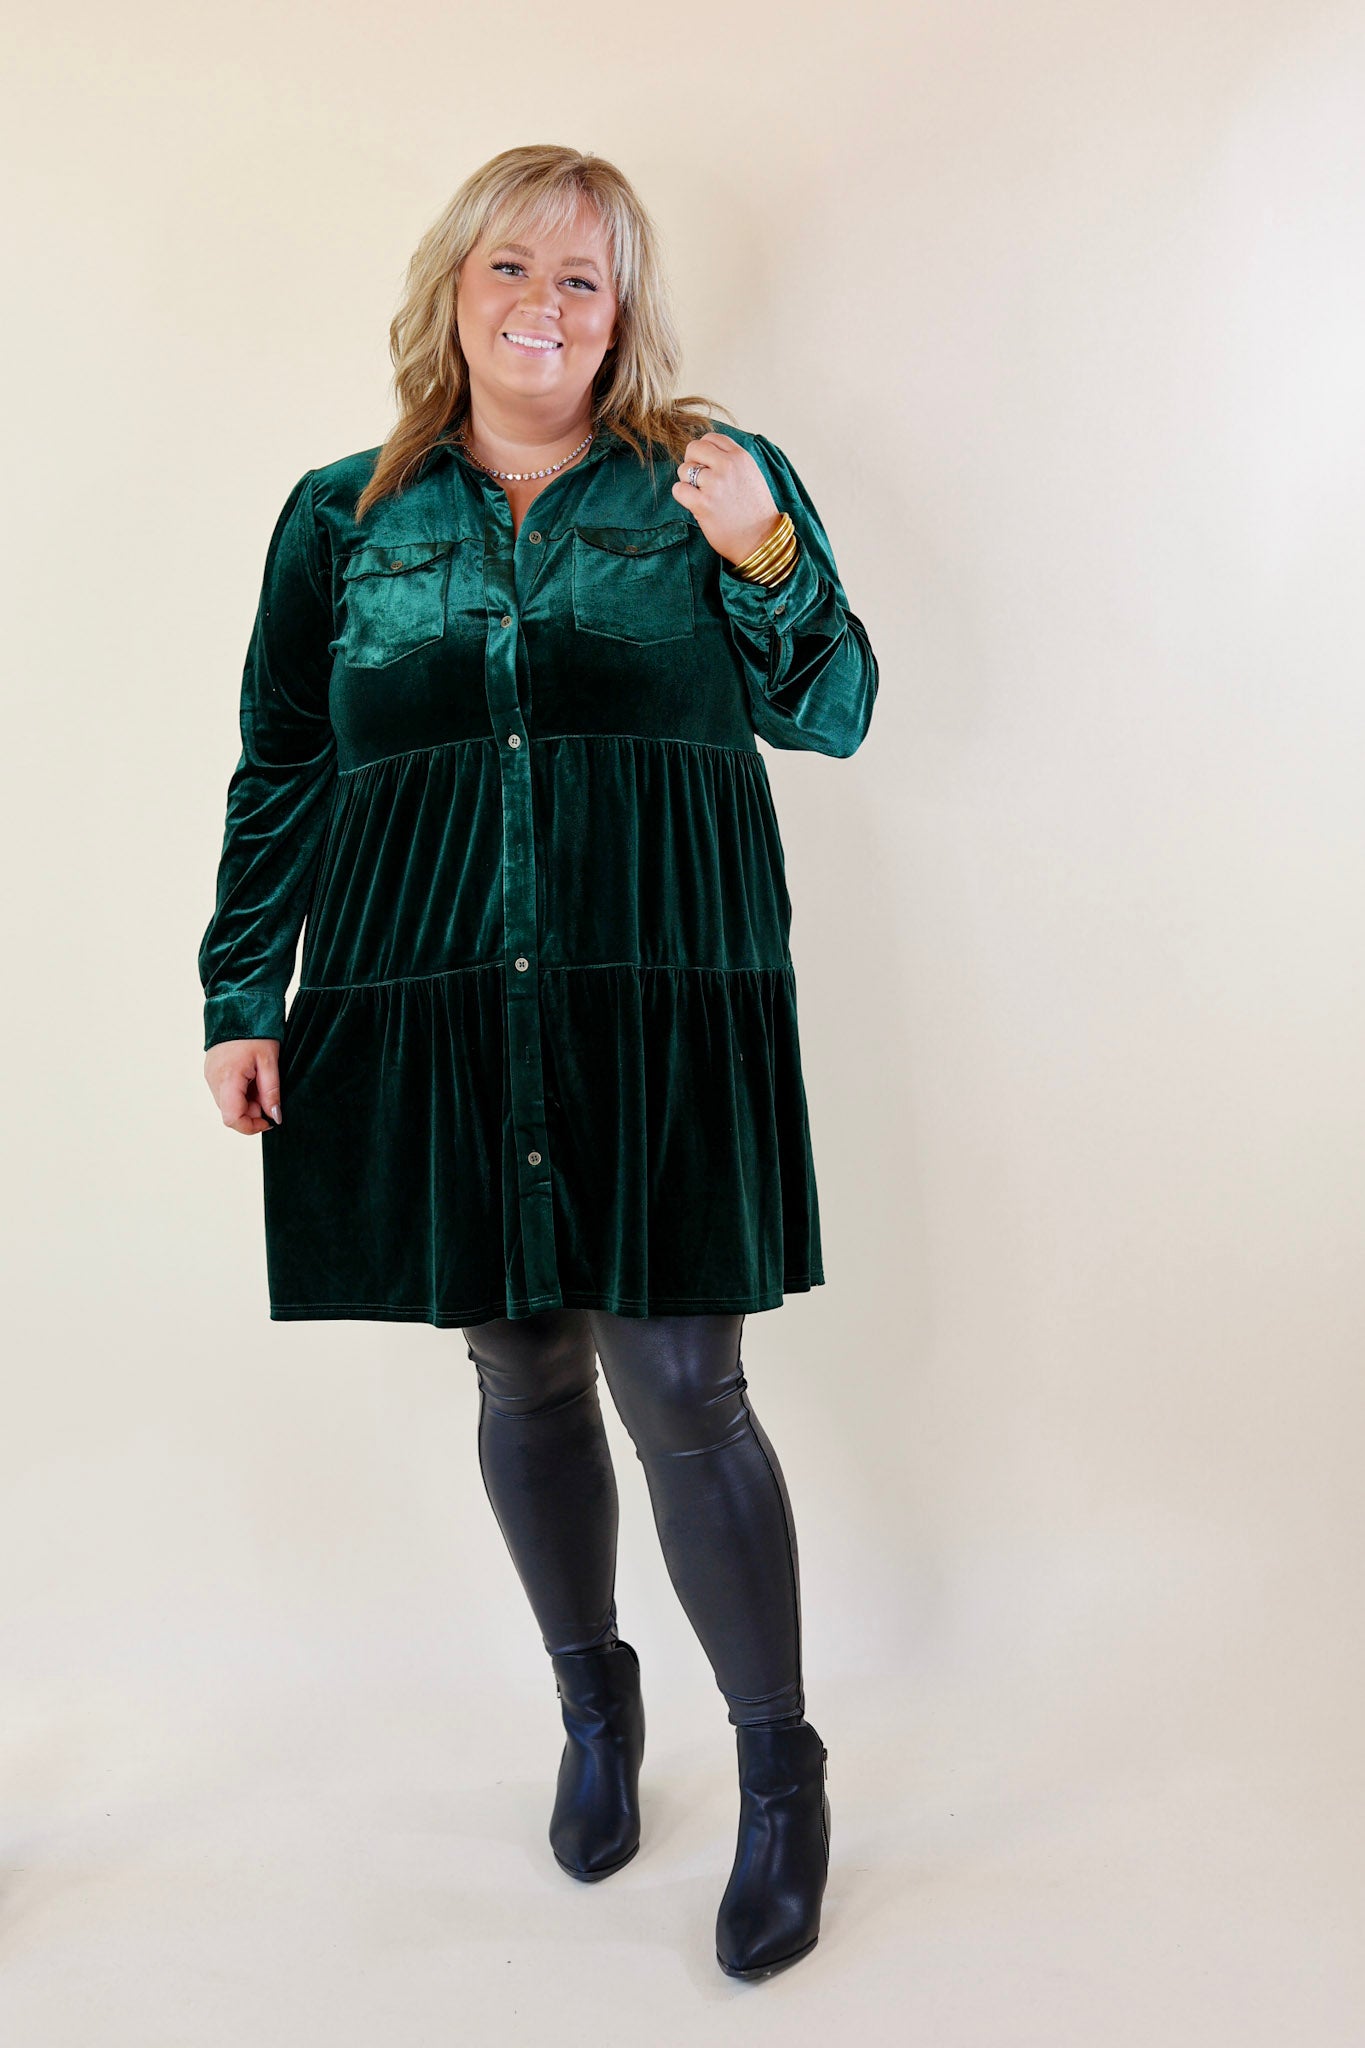 Grateful Gathering Velvet Button Up Dress with Long Sleeves in Emerald Green - Giddy Up Glamour Boutique